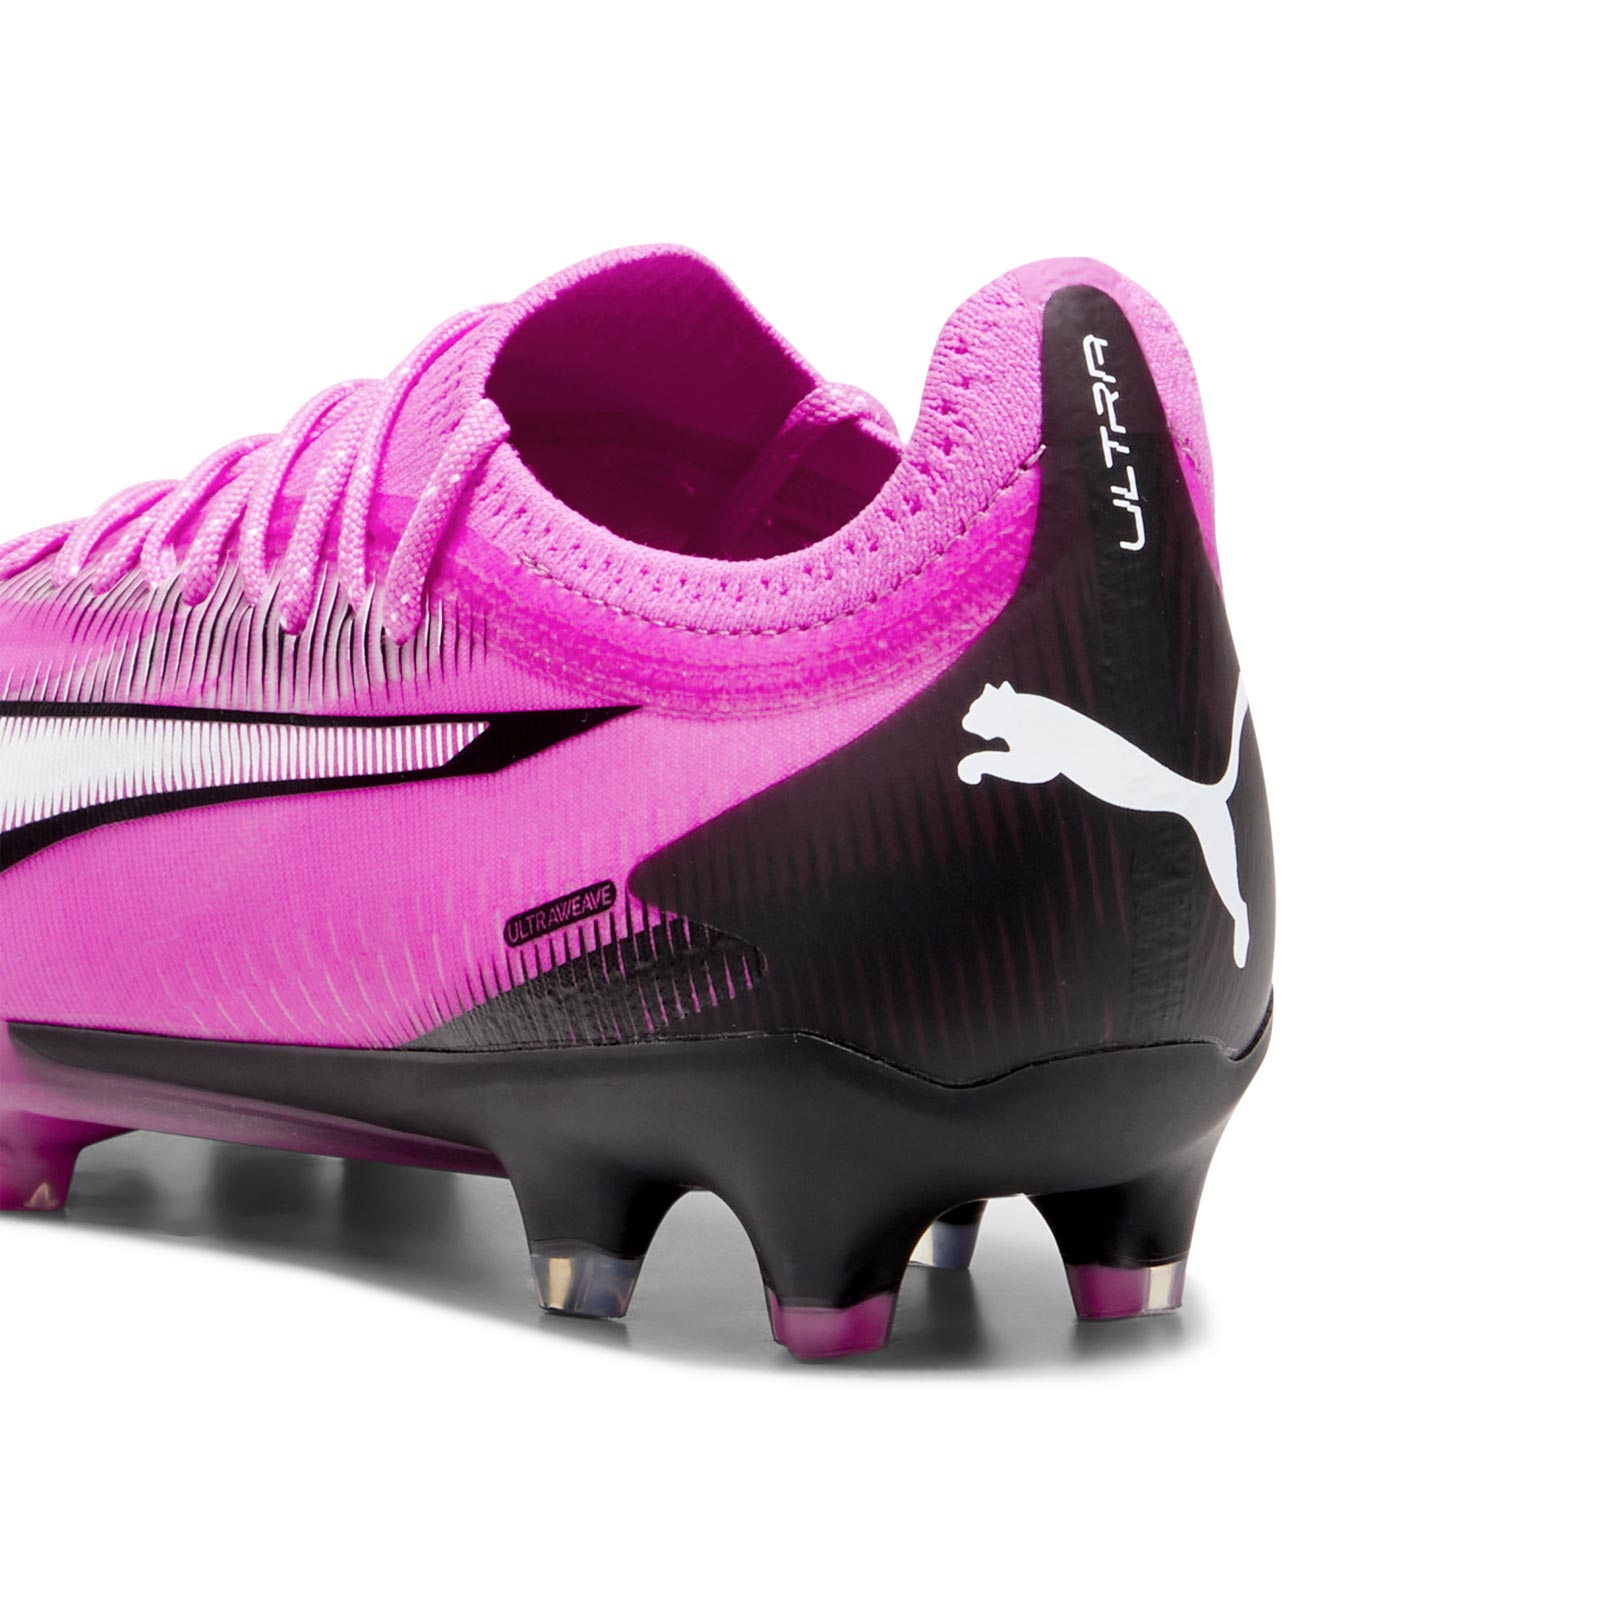 PUMA ULTRA ULTIMATE FIRM-GROUND WOMENS FOOTBALL BOOTS